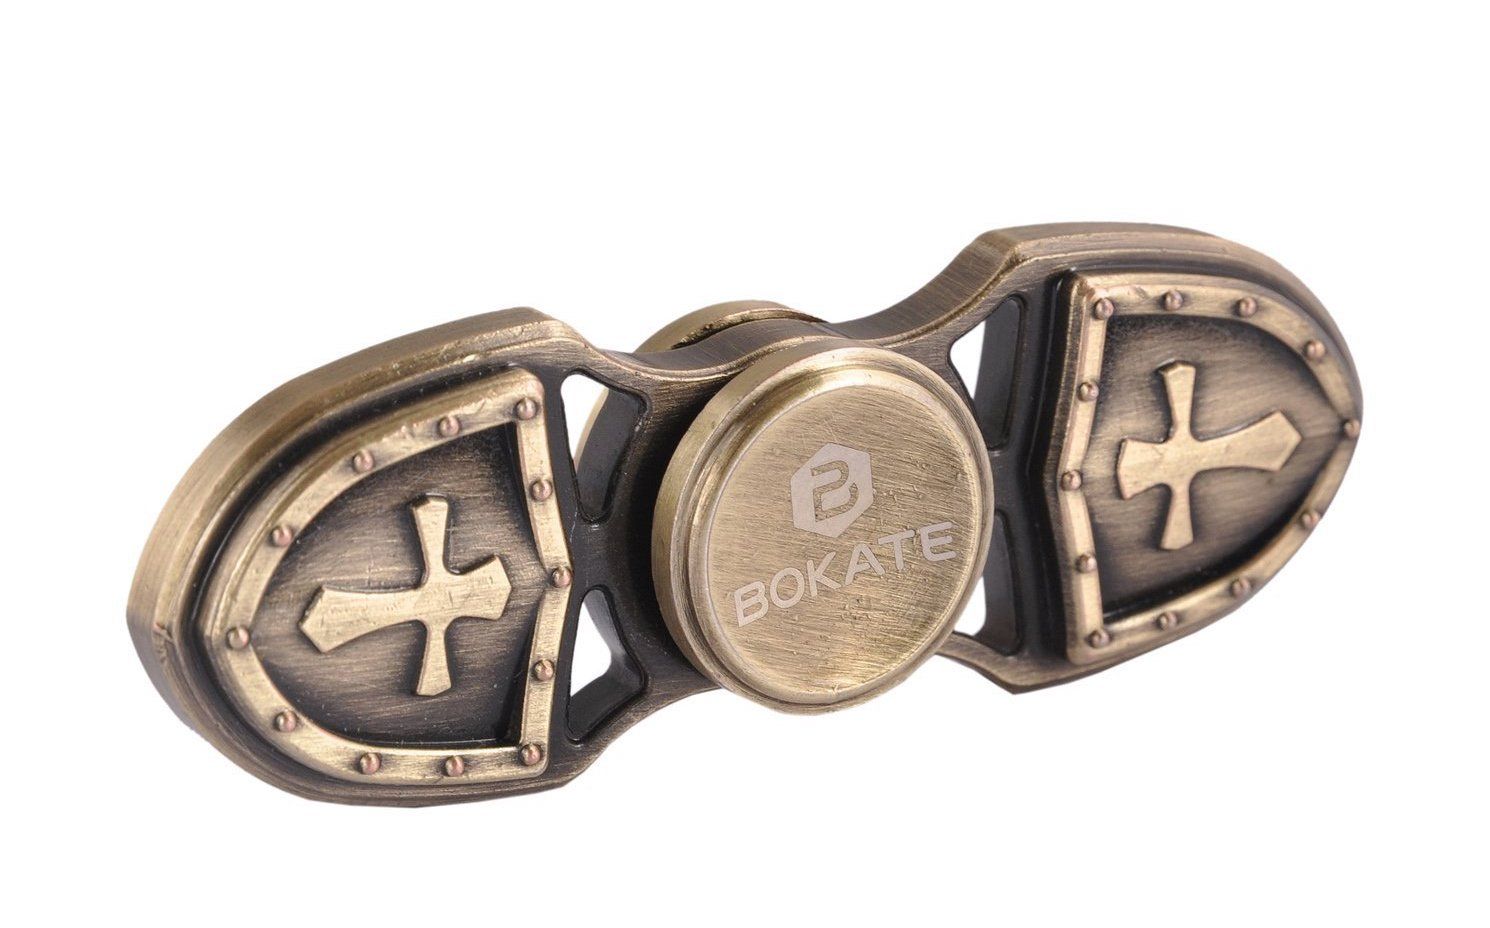 Cool fidget spinners: The metal medieval style spinner from Bokate